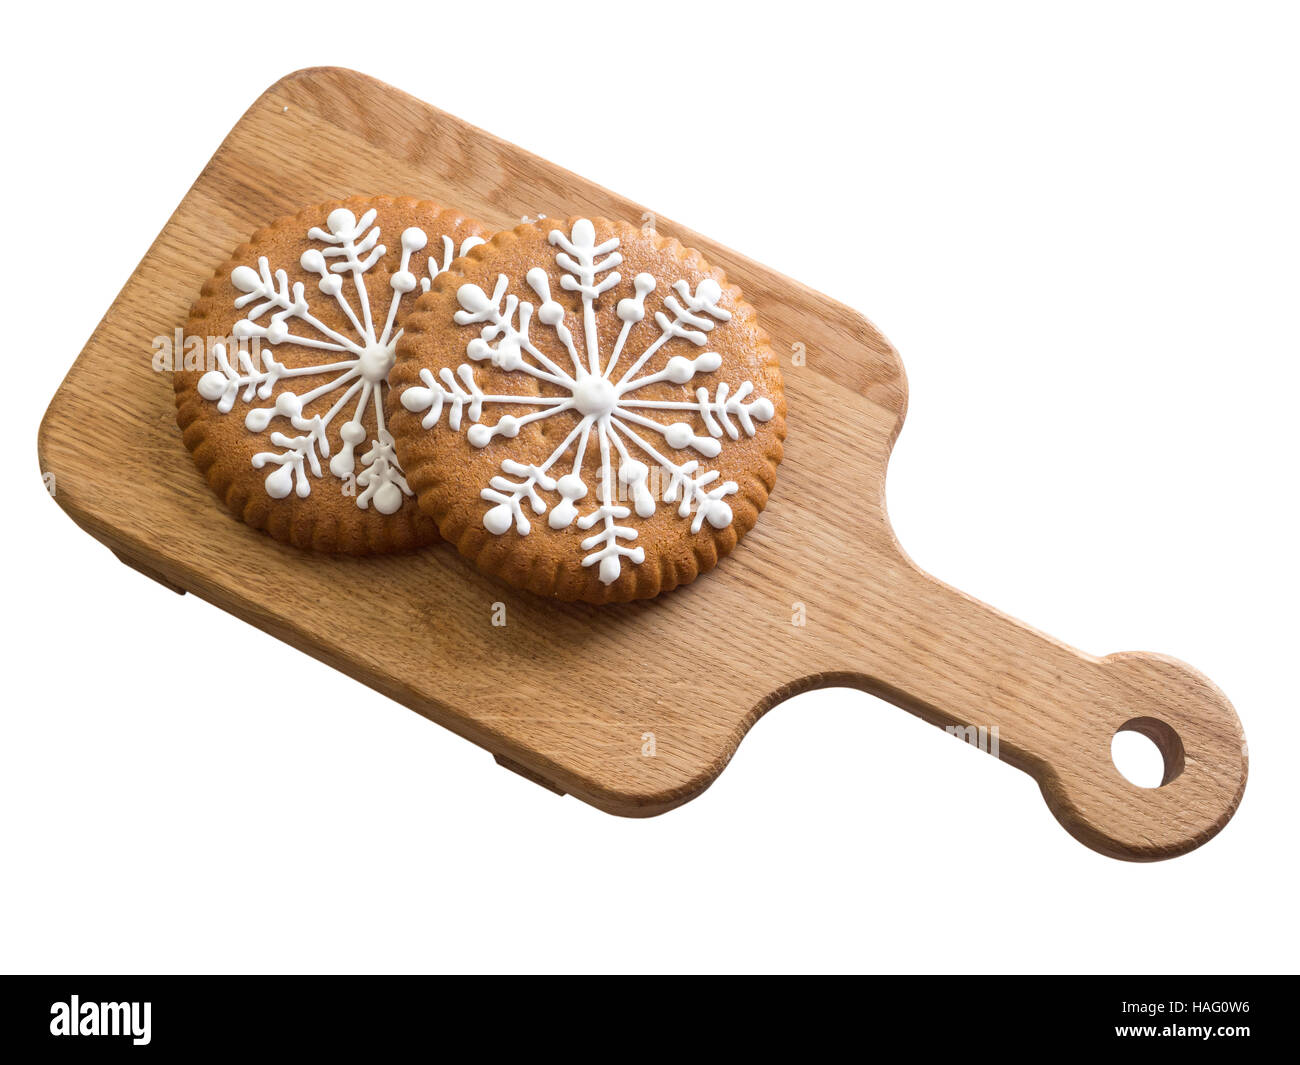 Gingerbread with snowflakes of the glaze. Sweets for Christmas. Two sticks on a wooden board. Stock Photo